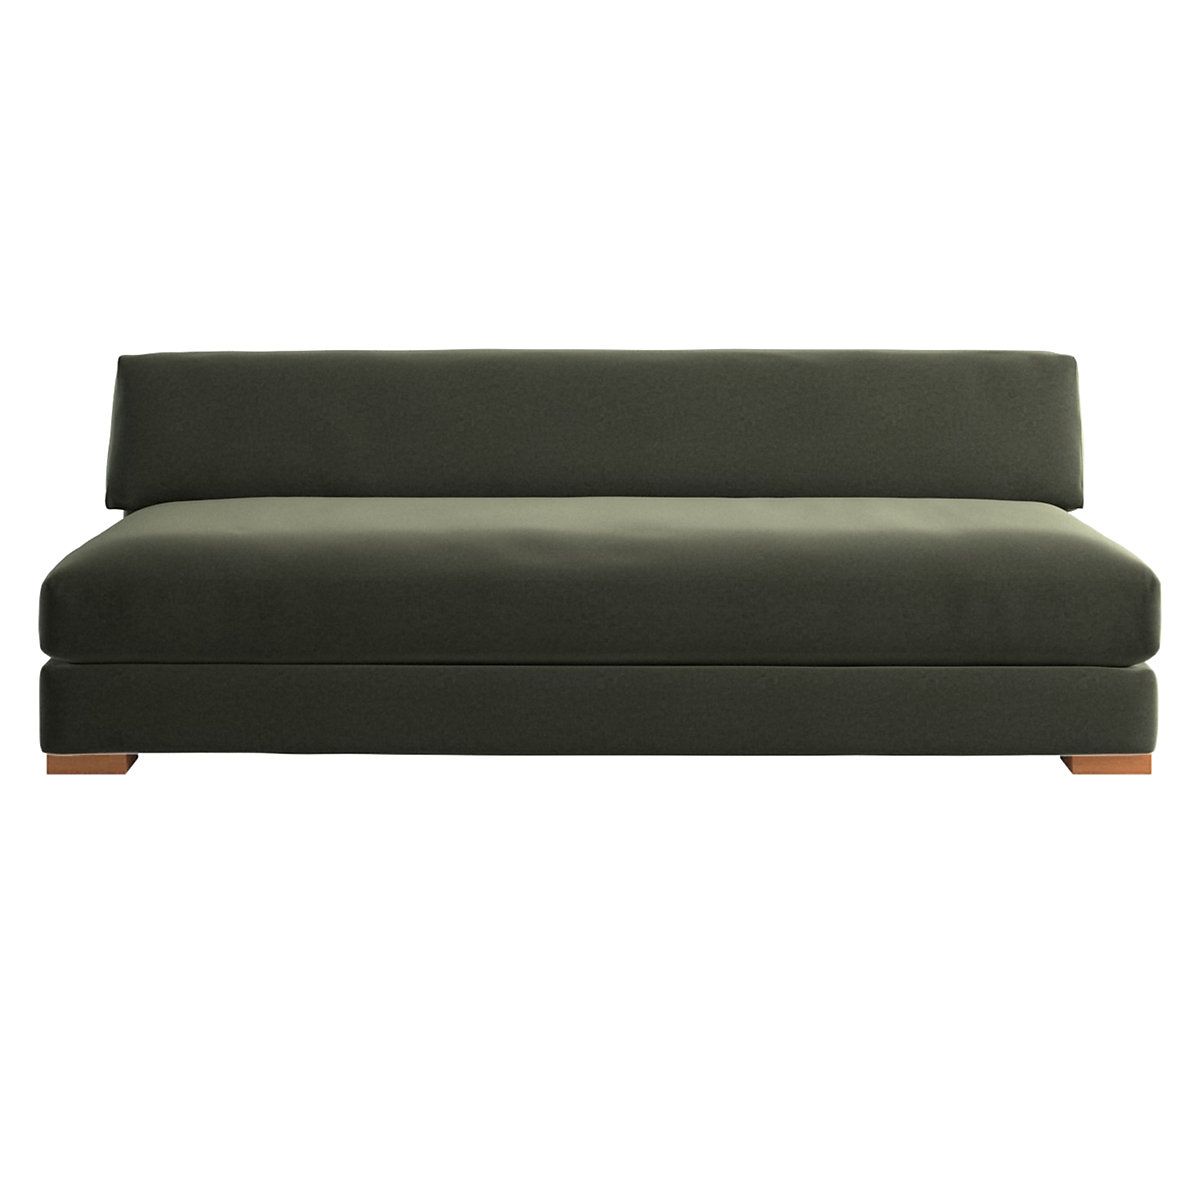 Well Liked Piazza Sofa + Reviews (View 15 of 25)